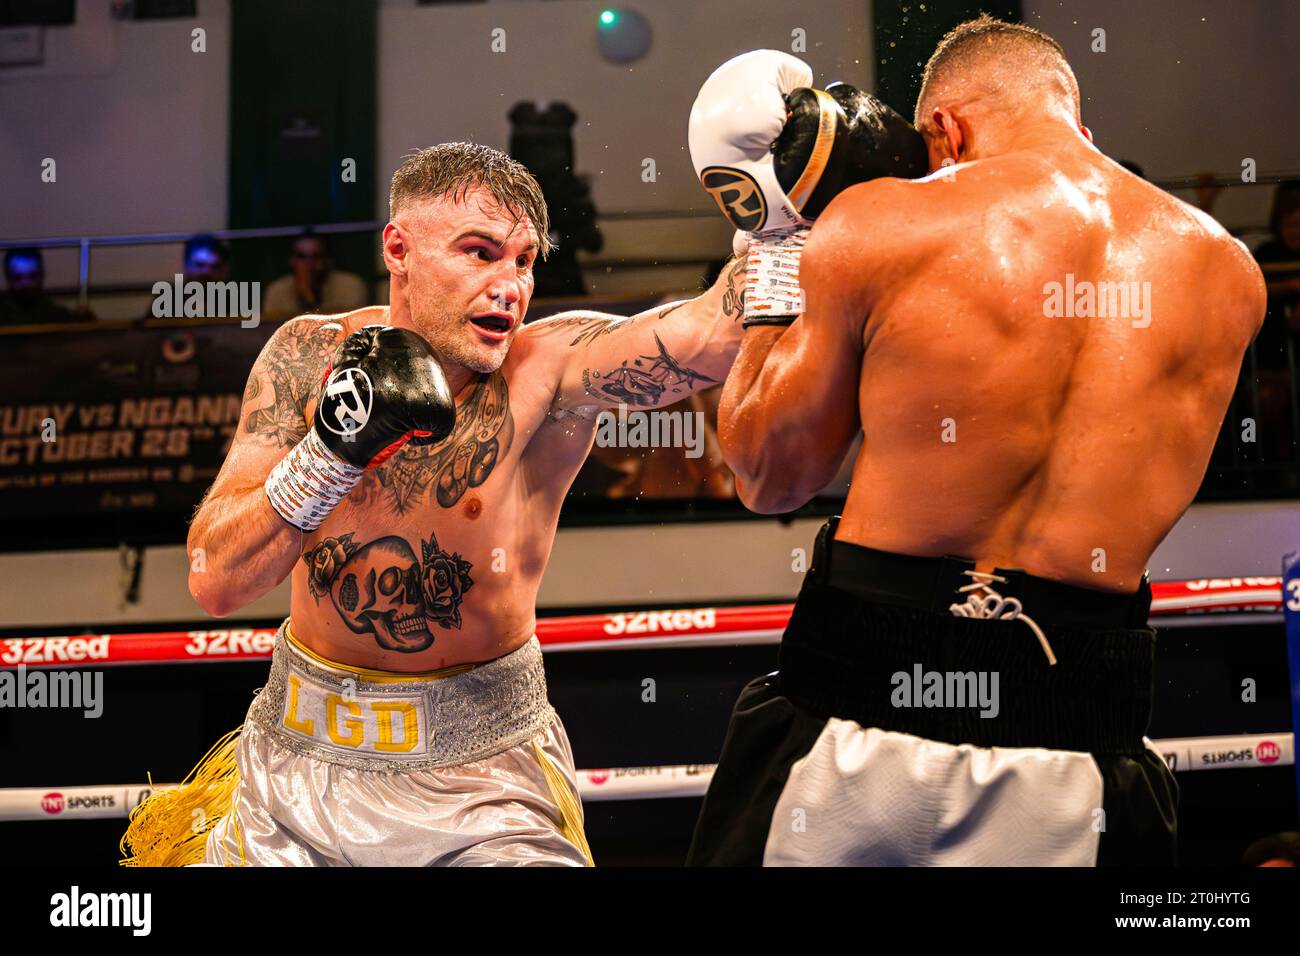 LONDON, UNITED KINGDOM. 06 Oct, 23. Ellis Zorro vs Luca D'Ortenzi  - Vacant Commonwealth Silver Featherweight Championship during Zorro vs D'Ortenzi Fight Night and undercards at York Hall on Friday, October 06, 2023 in LONDON, ENGLAND. Credit: Taka G Wu/Alamy Live News Stock Photo